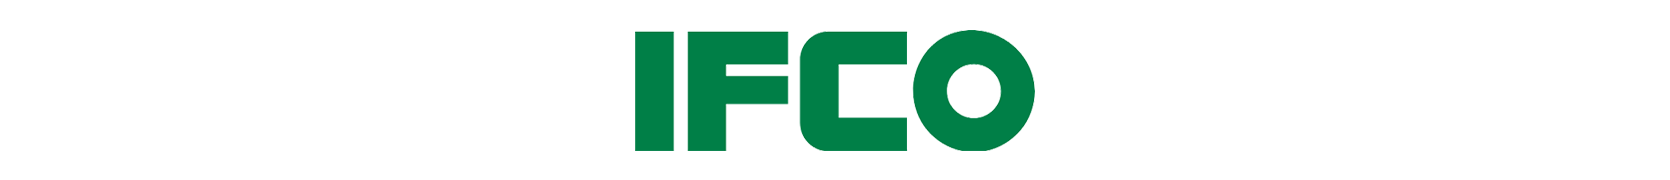 IFCO Kundenlogos Banner 2021_.png